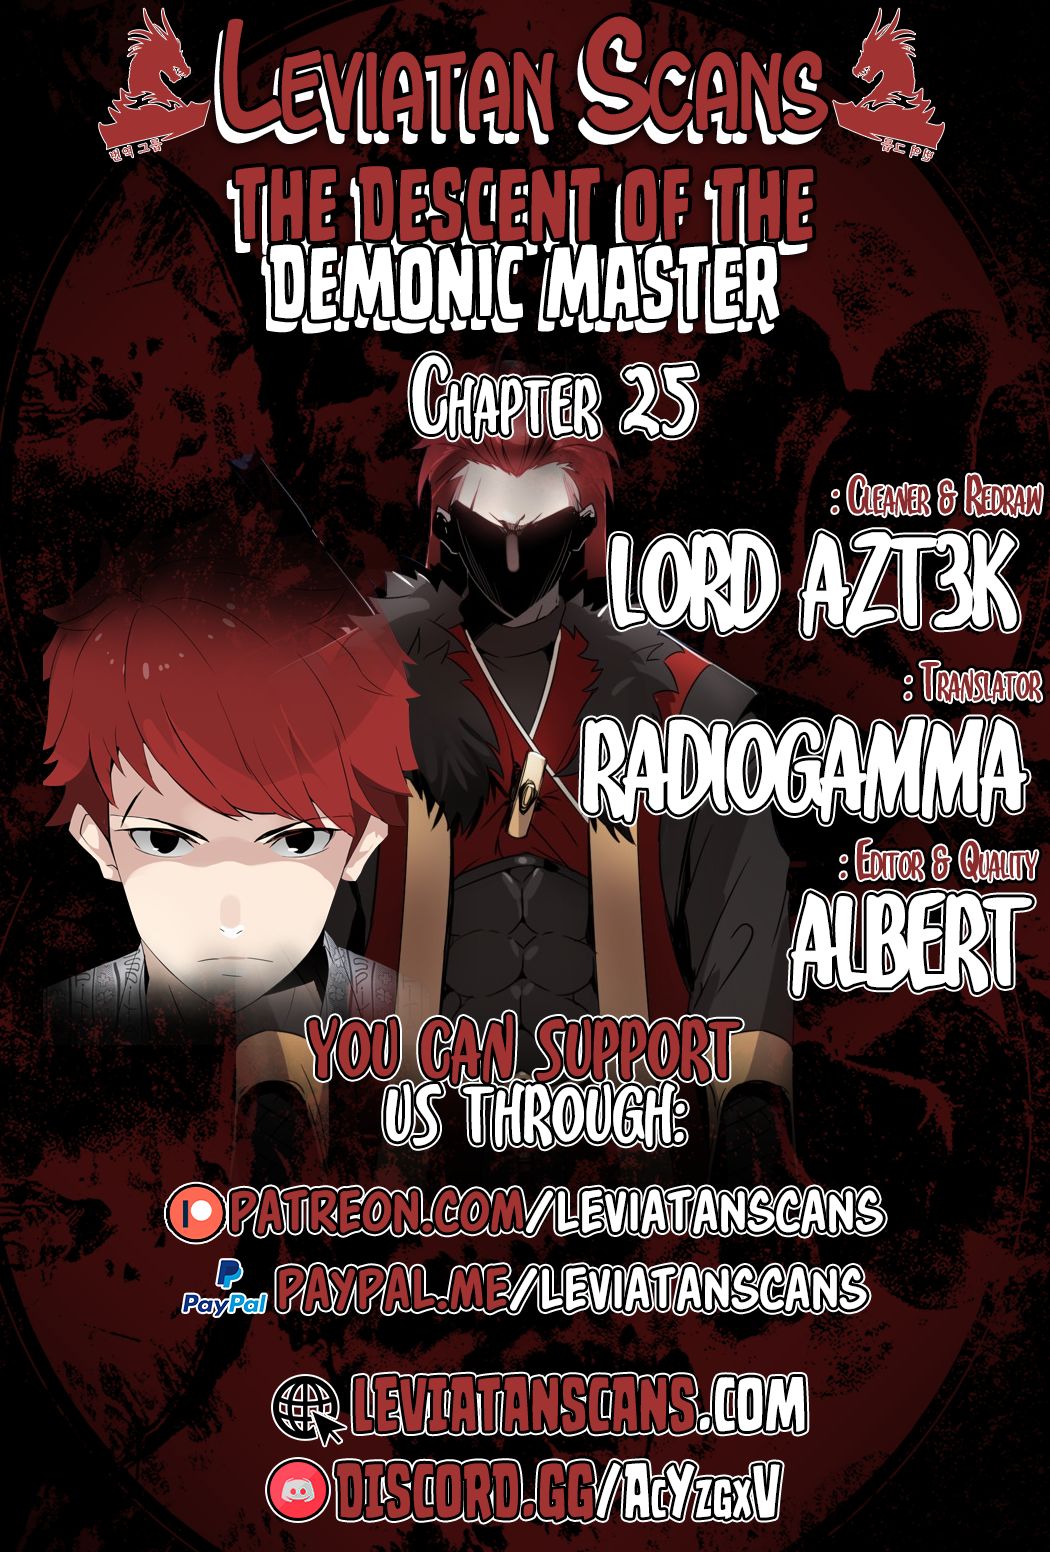 The Descent Of The Demonic Master Chapter 25